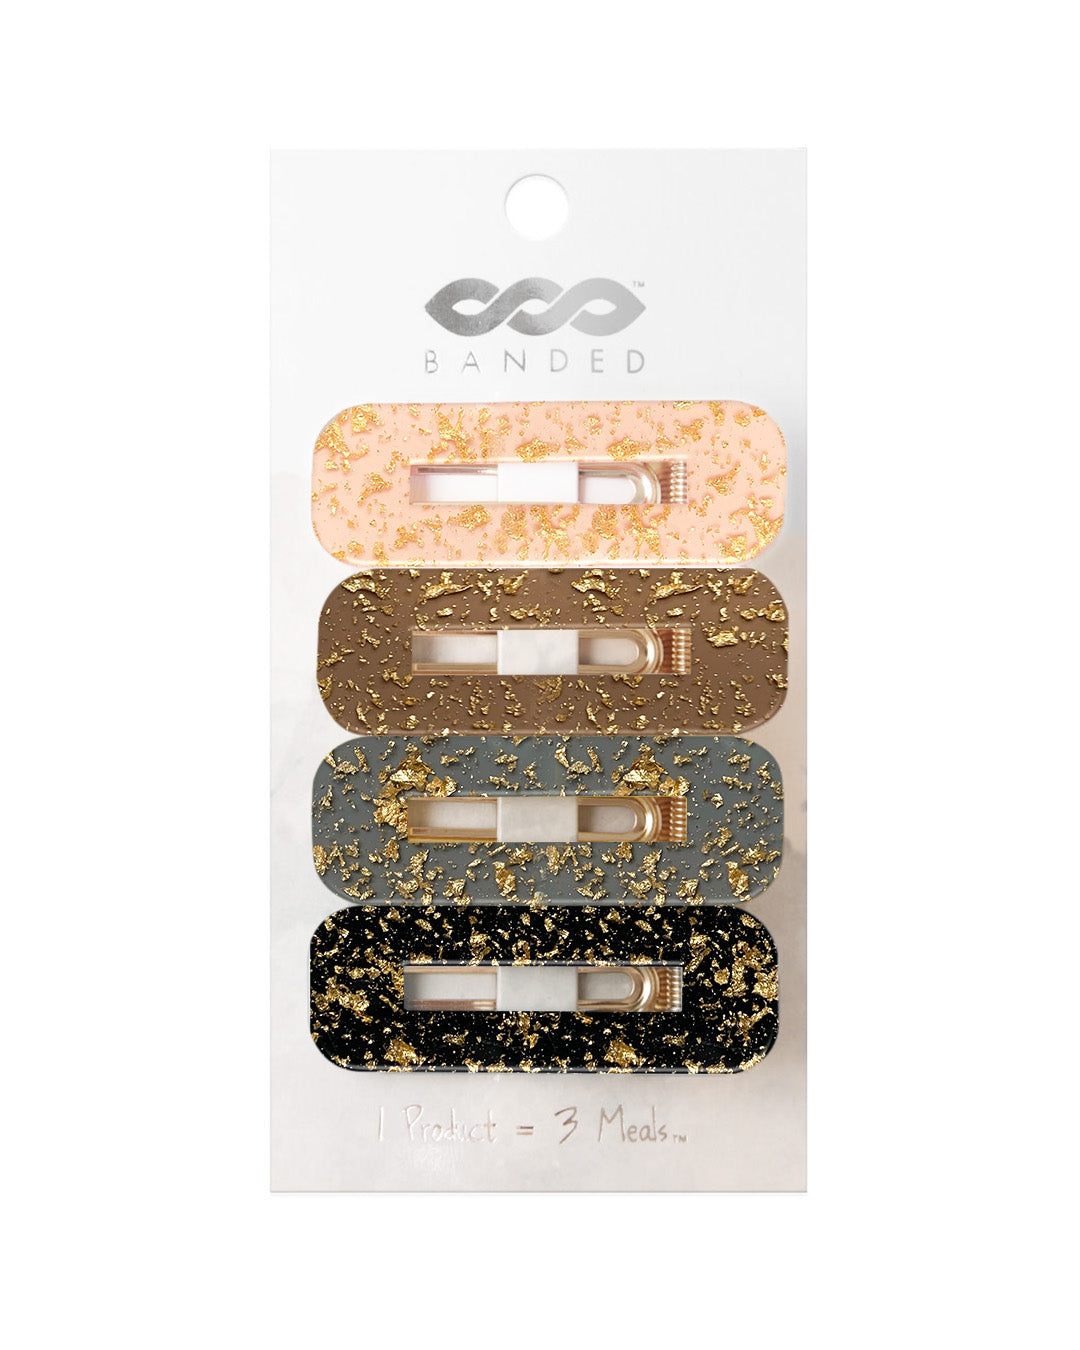 4 colors of hair clips on card packaging.